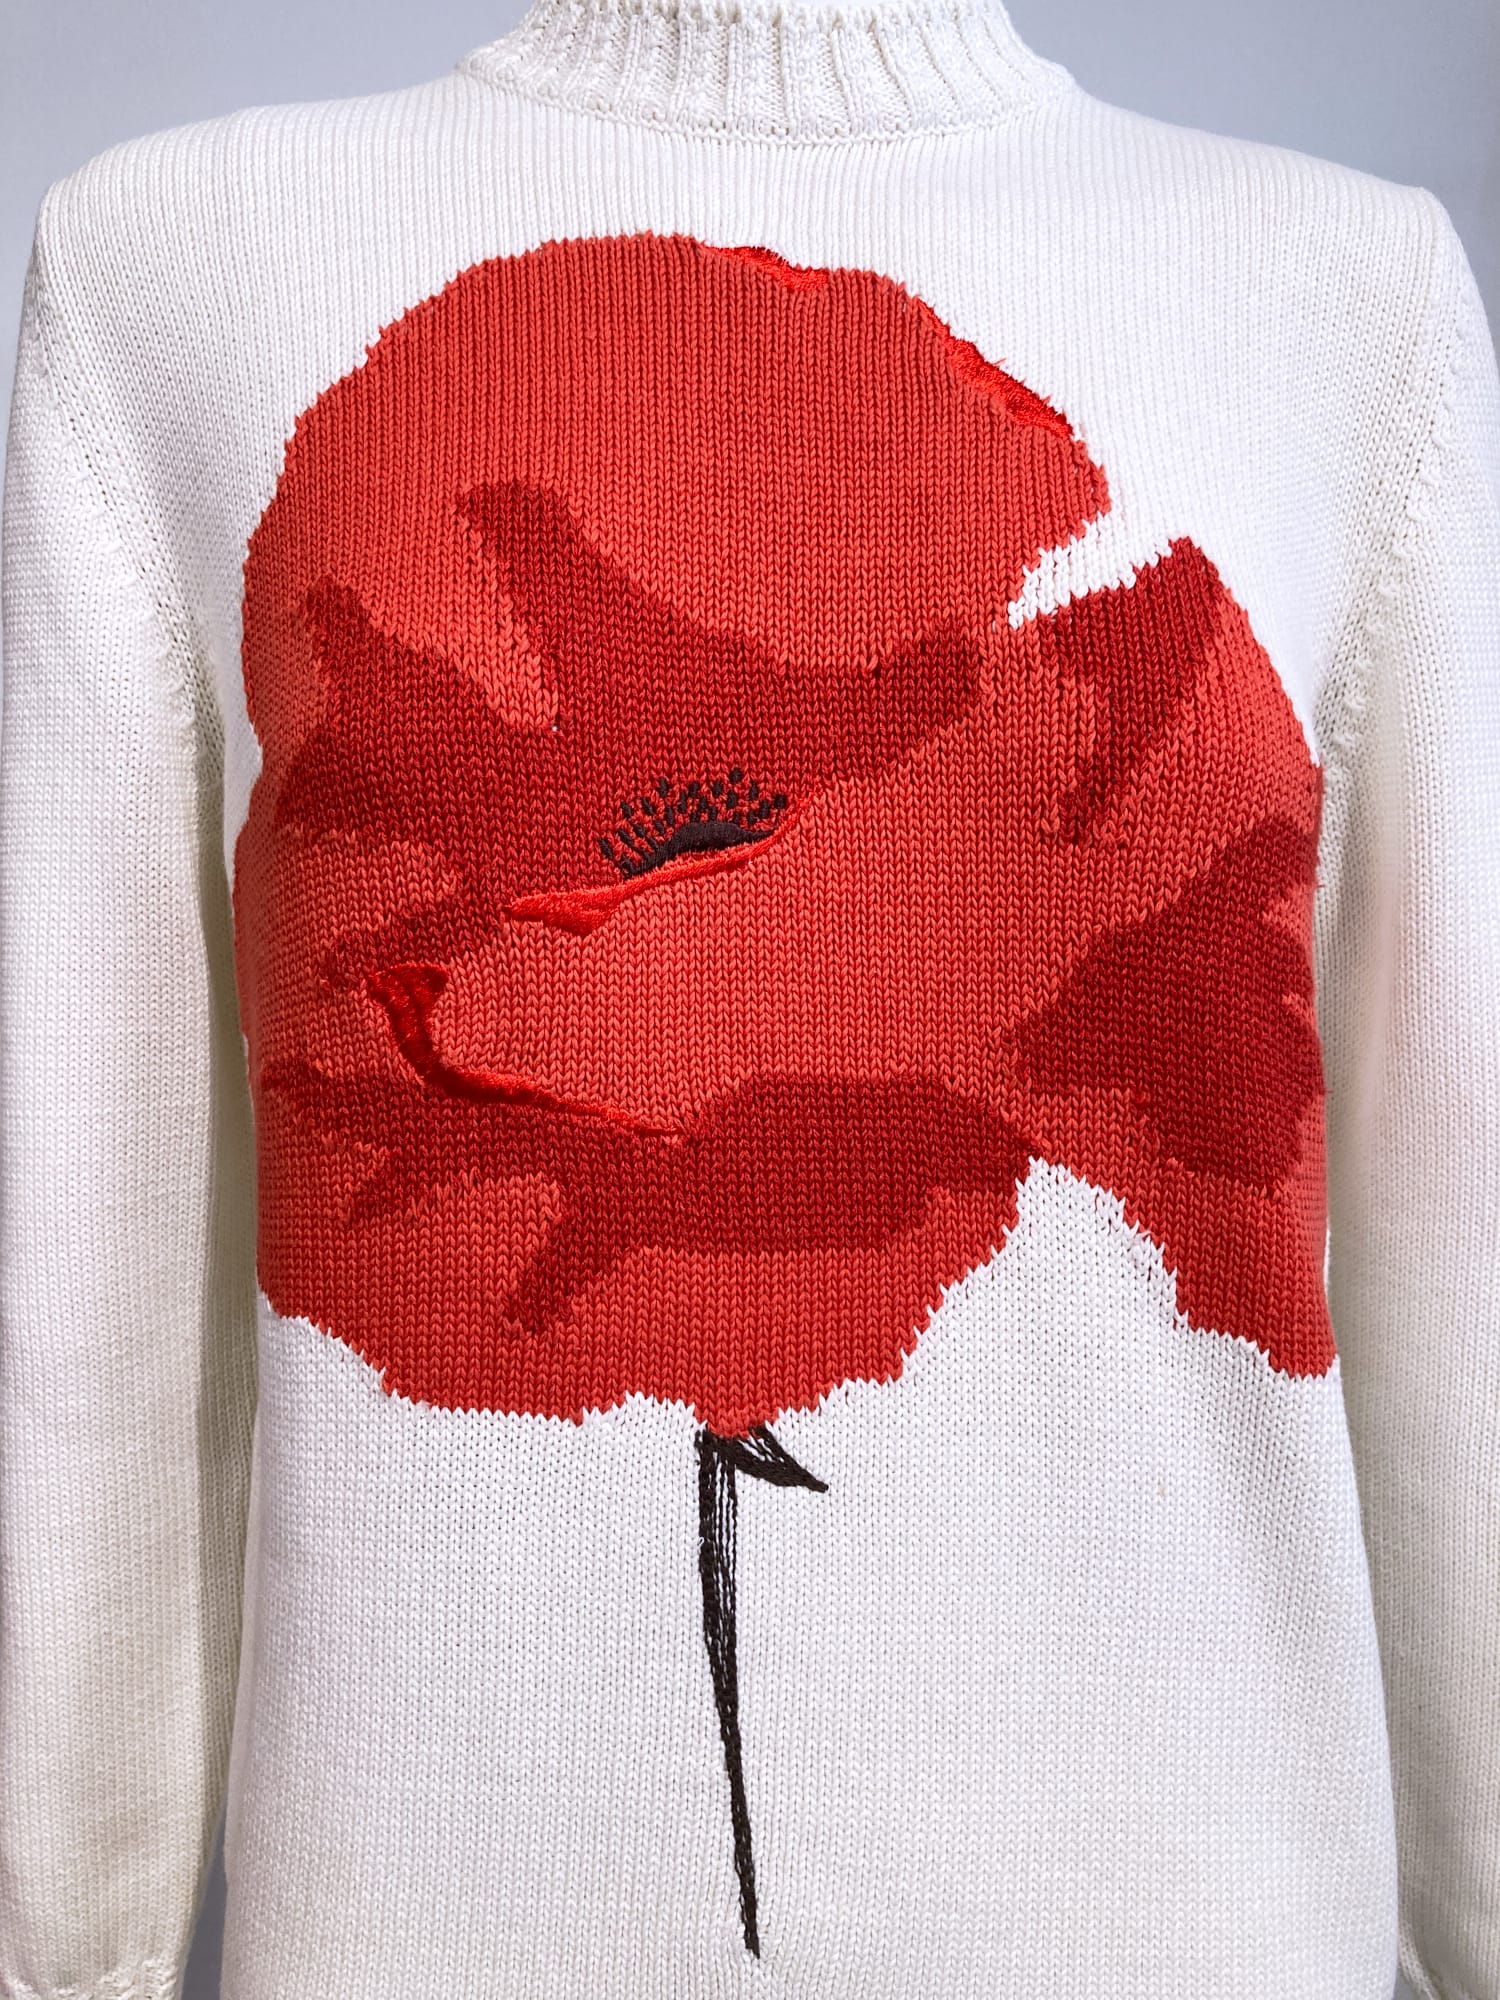 Iceberg cream knitted cotton mock neck jumper with red rose motif